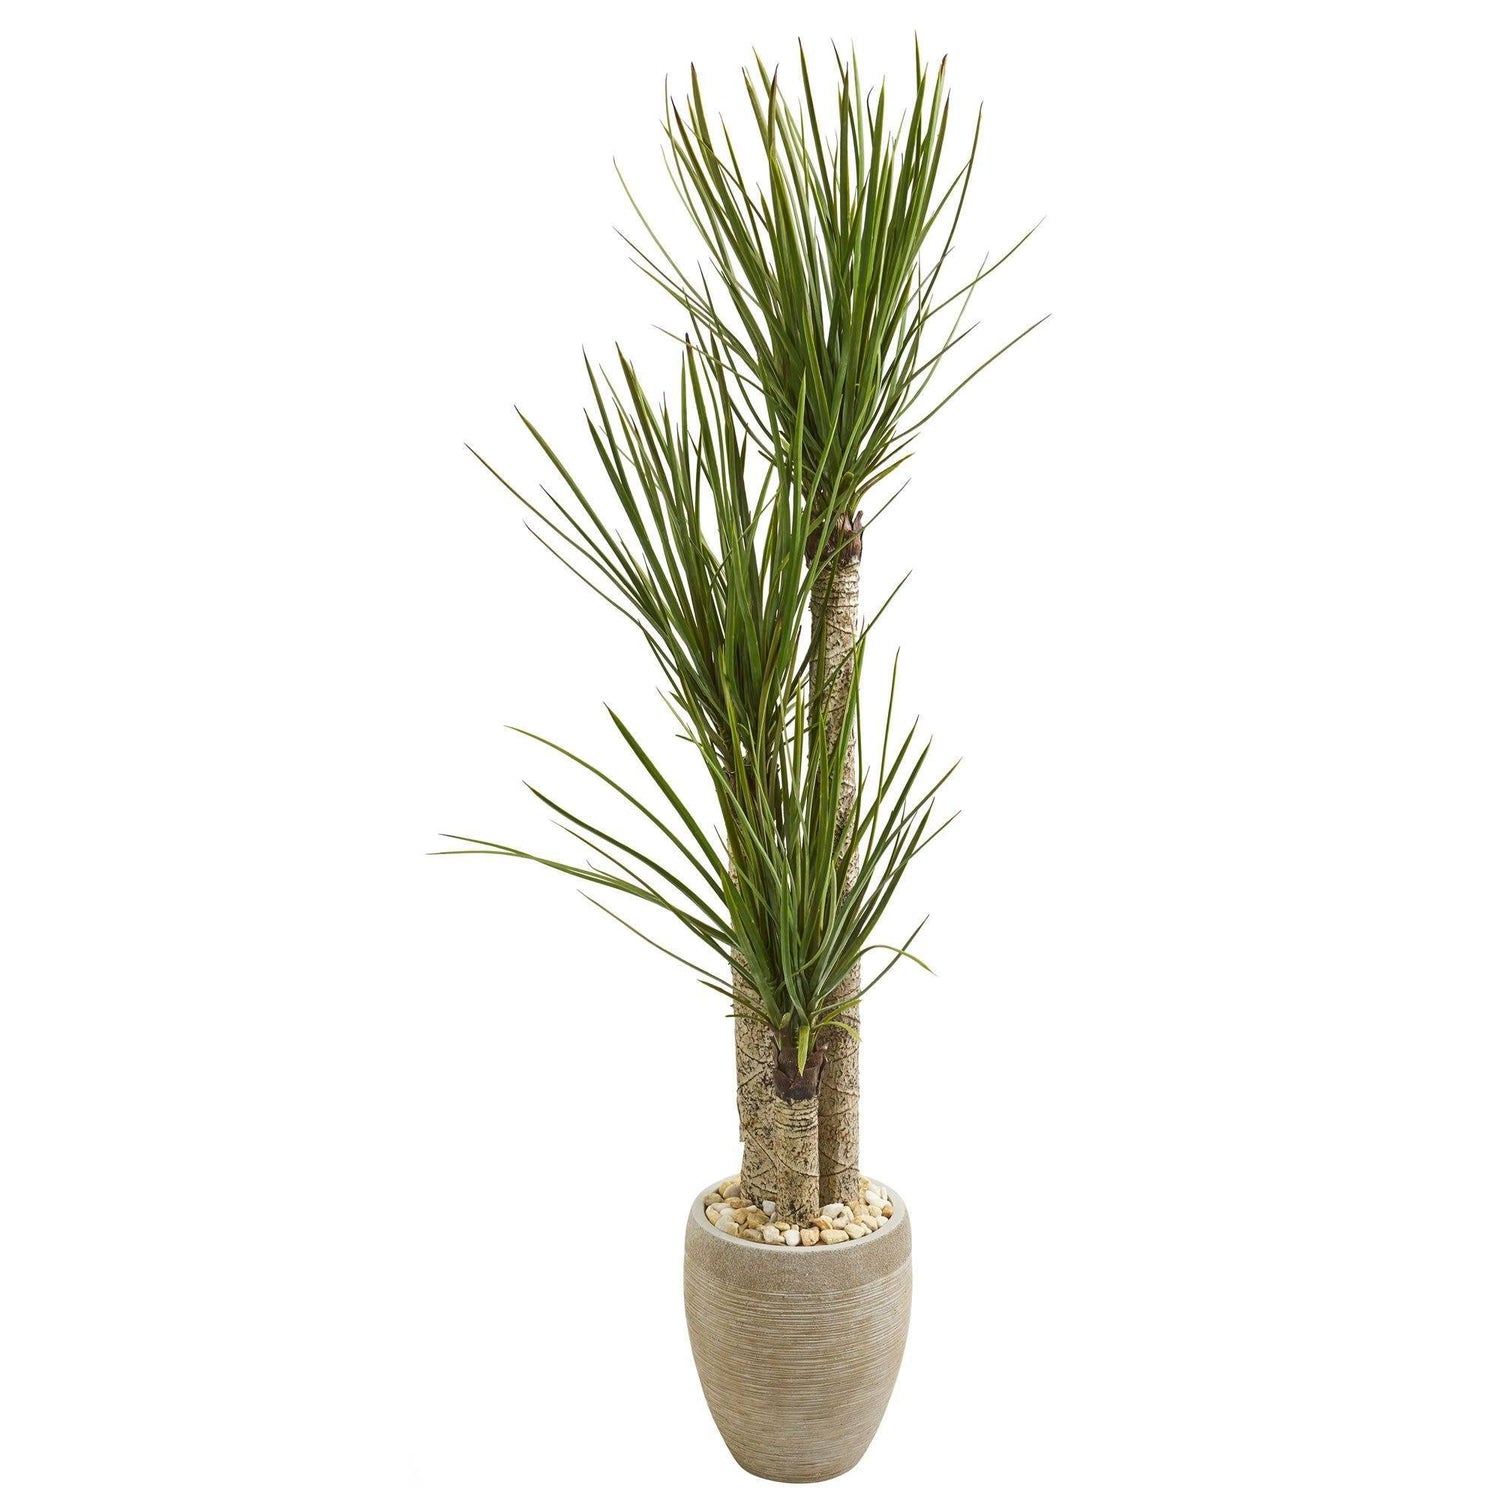 64” Yucca Artificial Tree in Sand Colored Planter